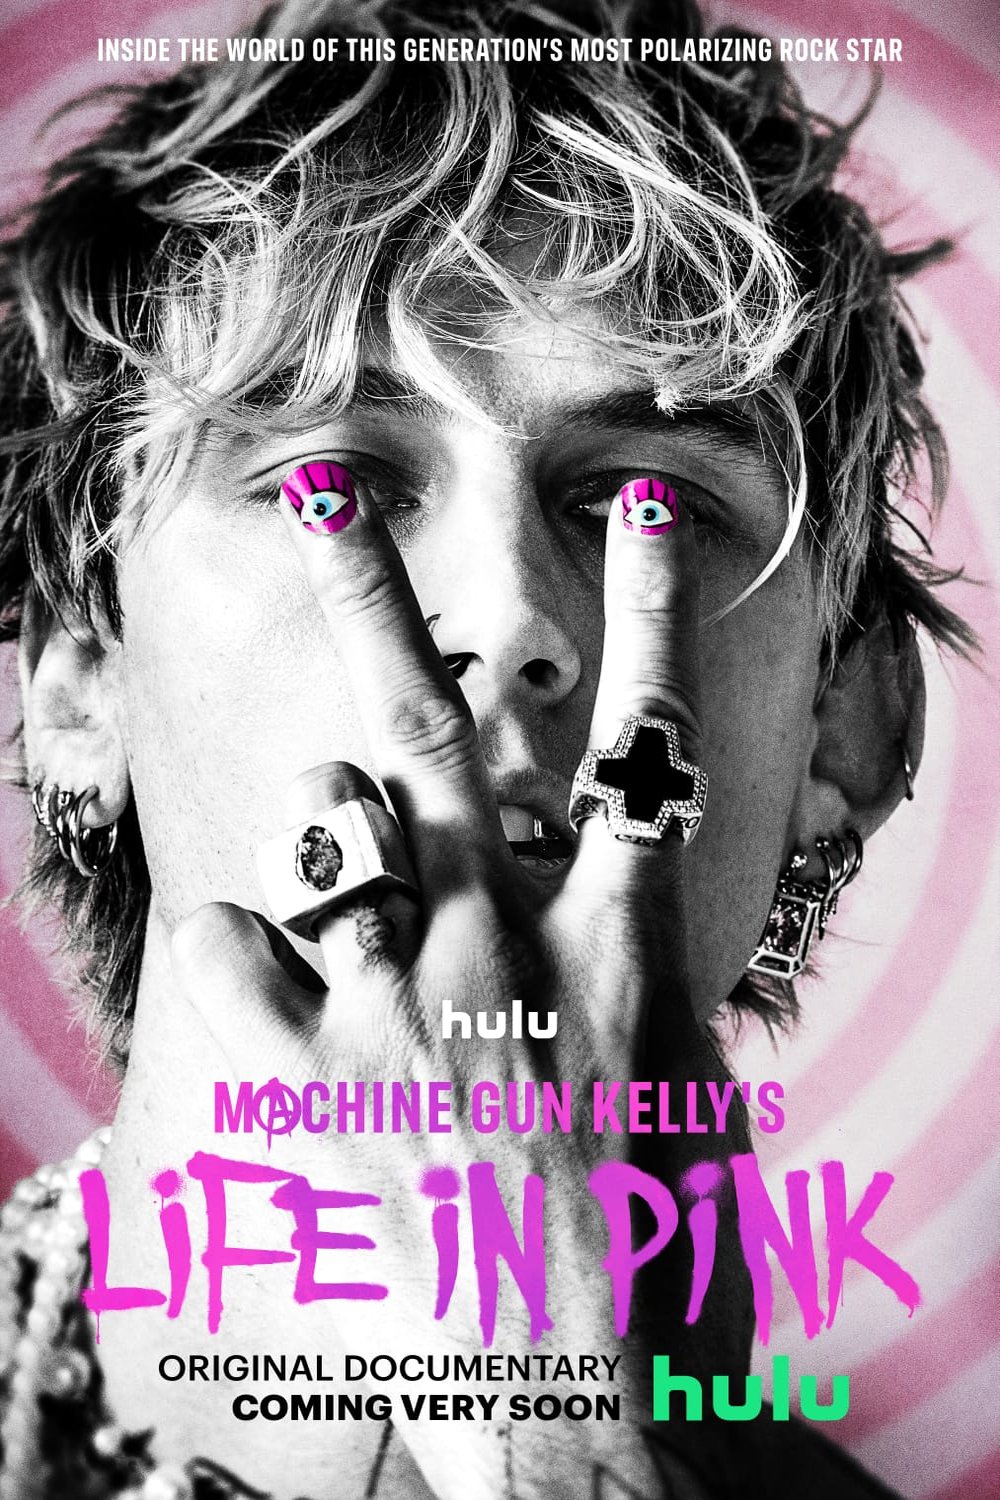 Poster of the movie Machine Gun Kelly's Life in Pink